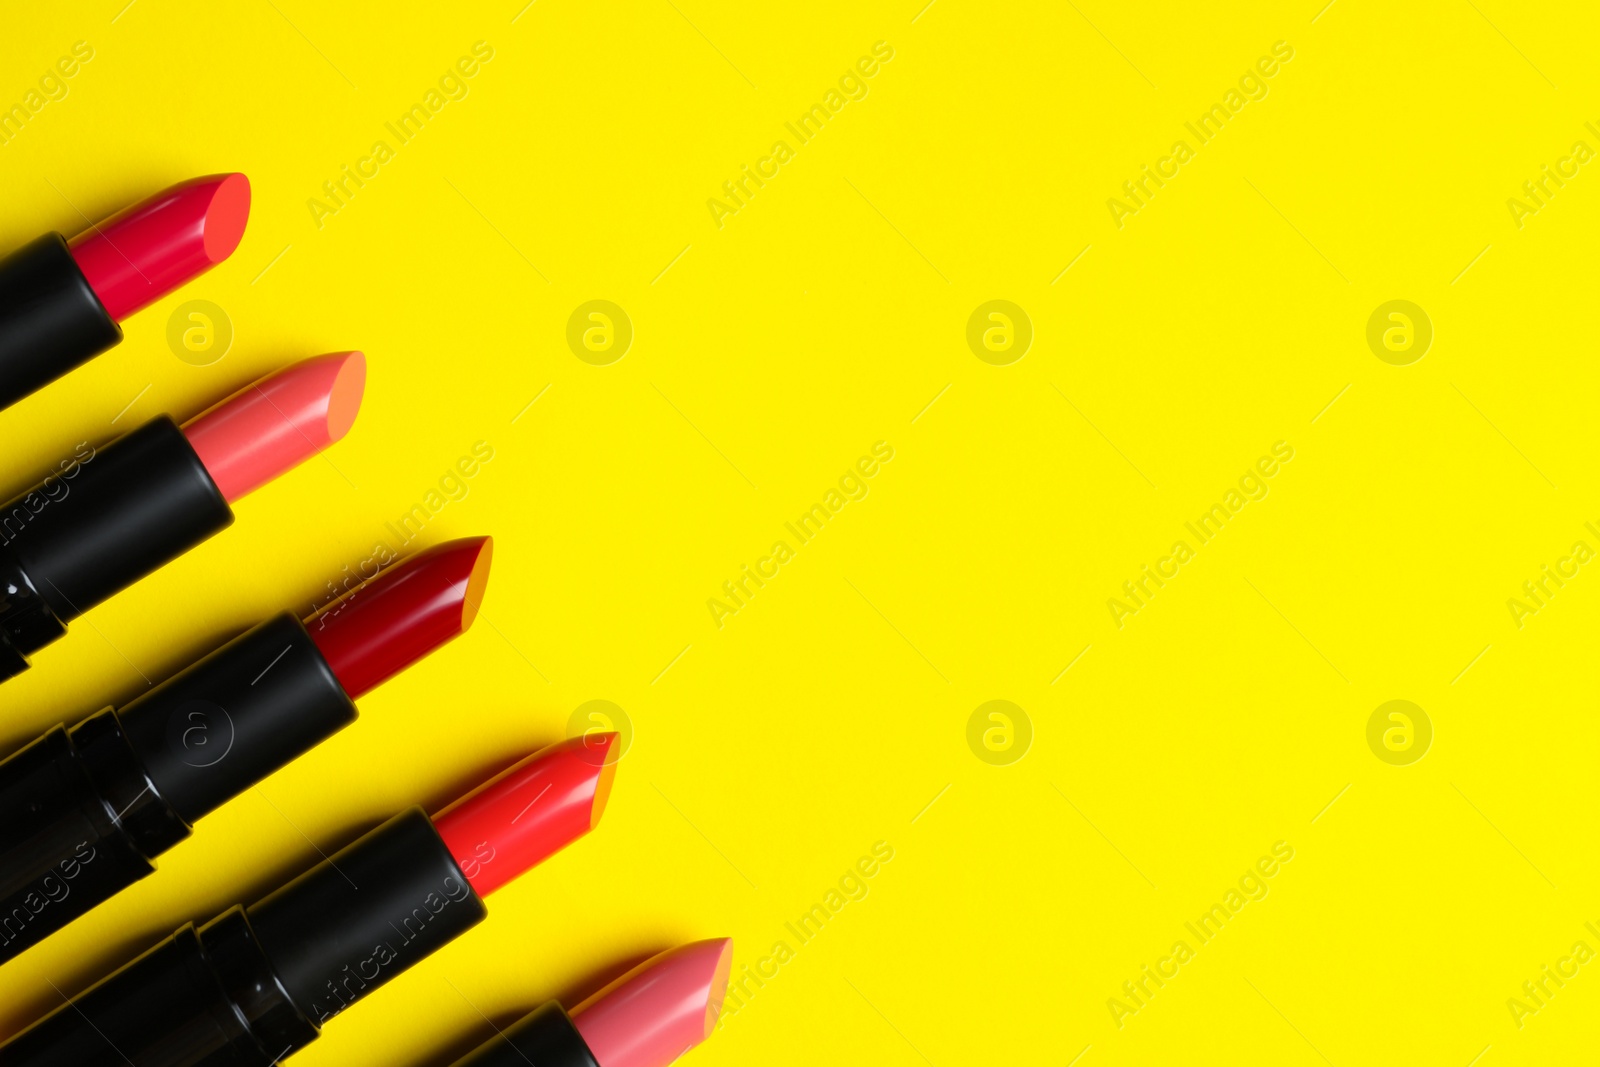 Photo of Many bright lipsticks on yellow background, flat lay. Space for text